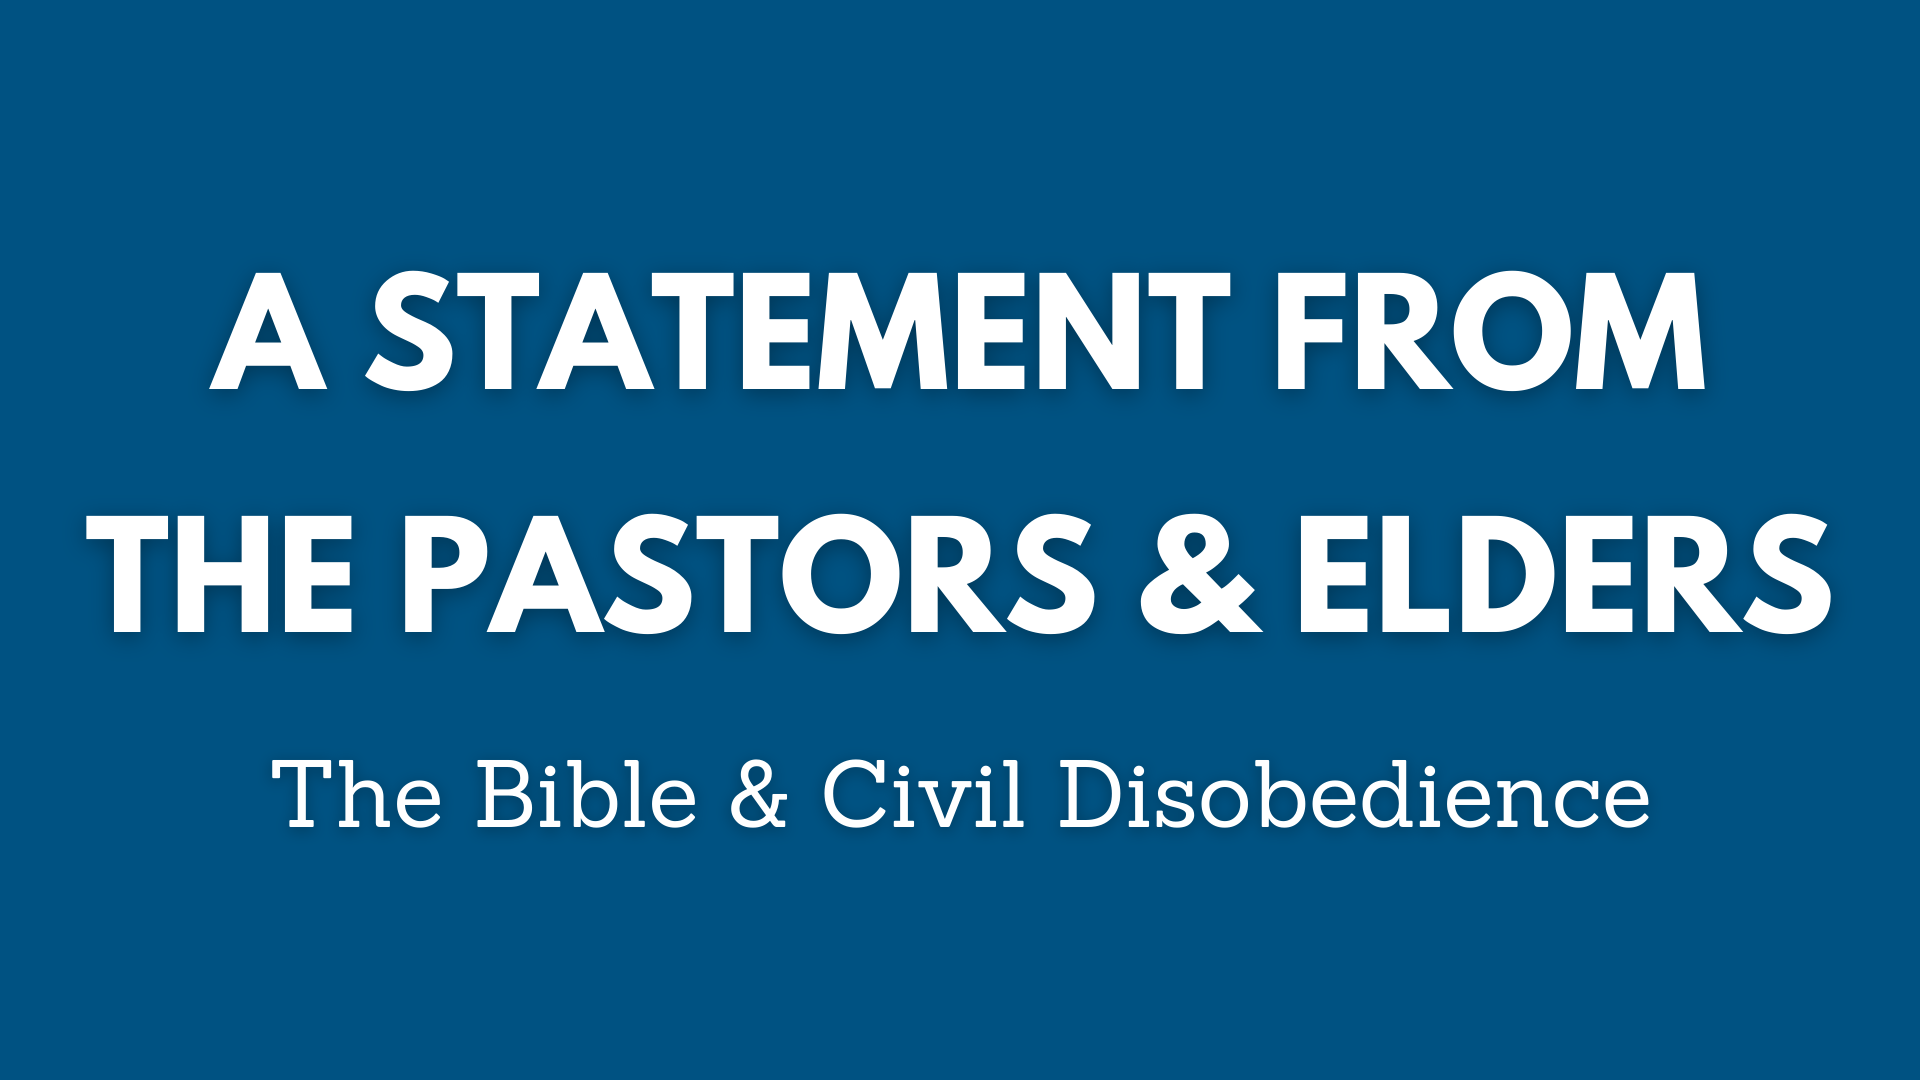 A Statement from the WH pastors and elders